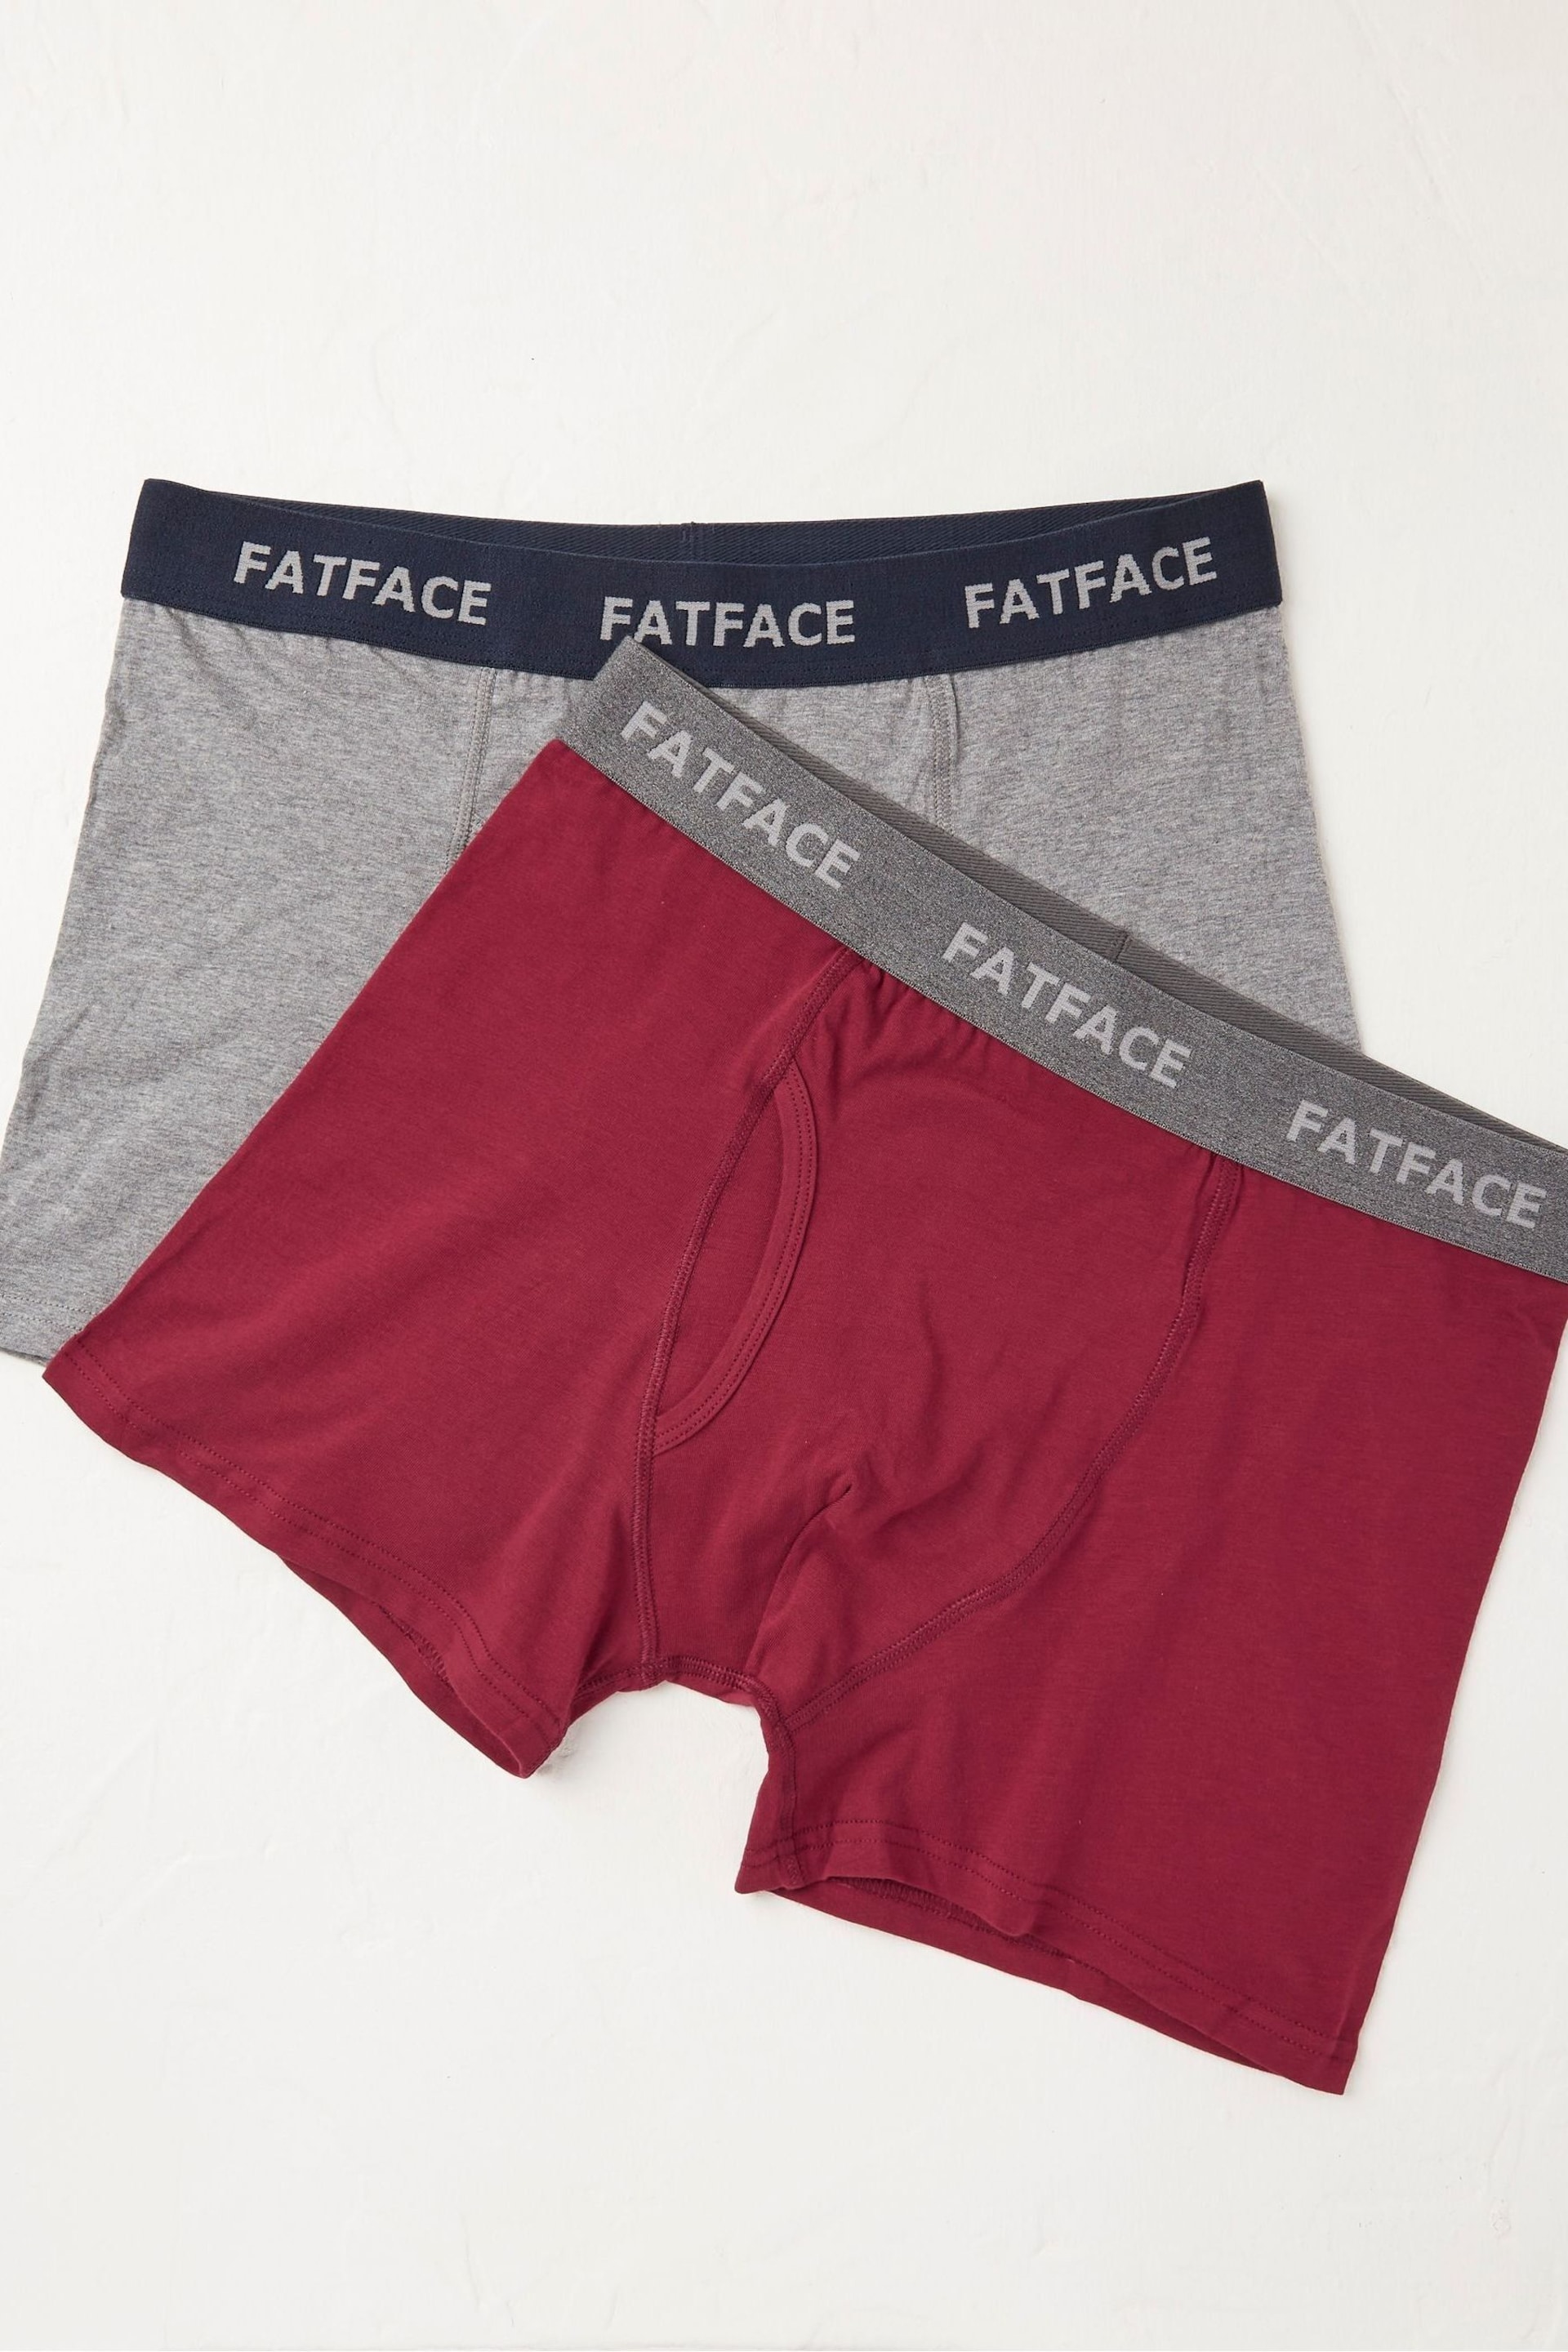 FatFace Burgundy Red Plain Boxers 2 Pack - Image 1 of 2